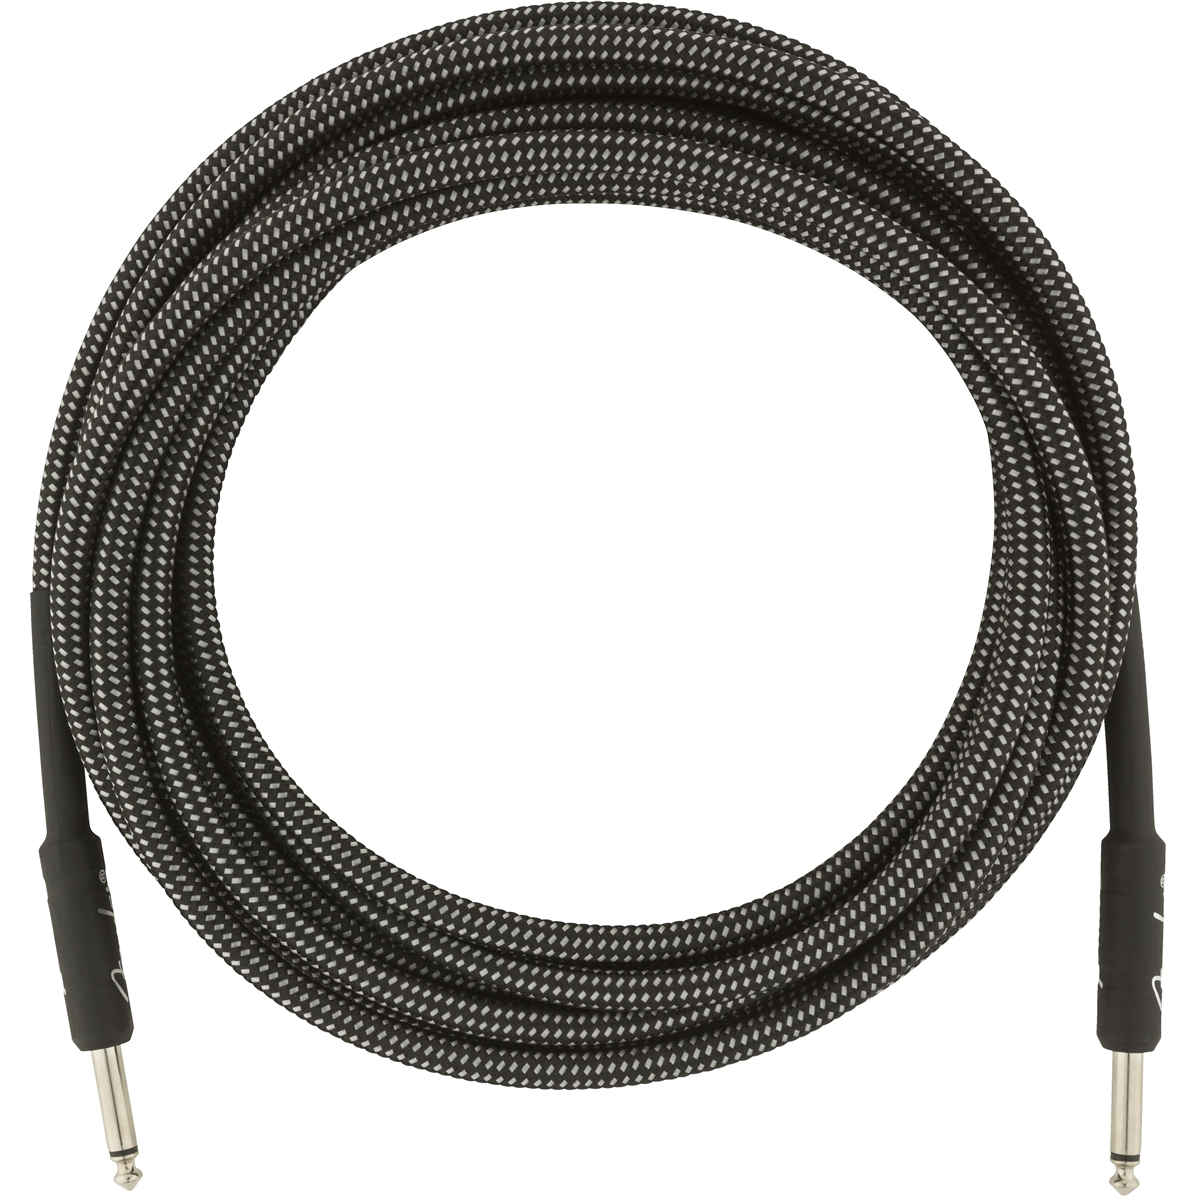 Fender Professional Series Instrument Cable 18.6 FT, Gray Tweed